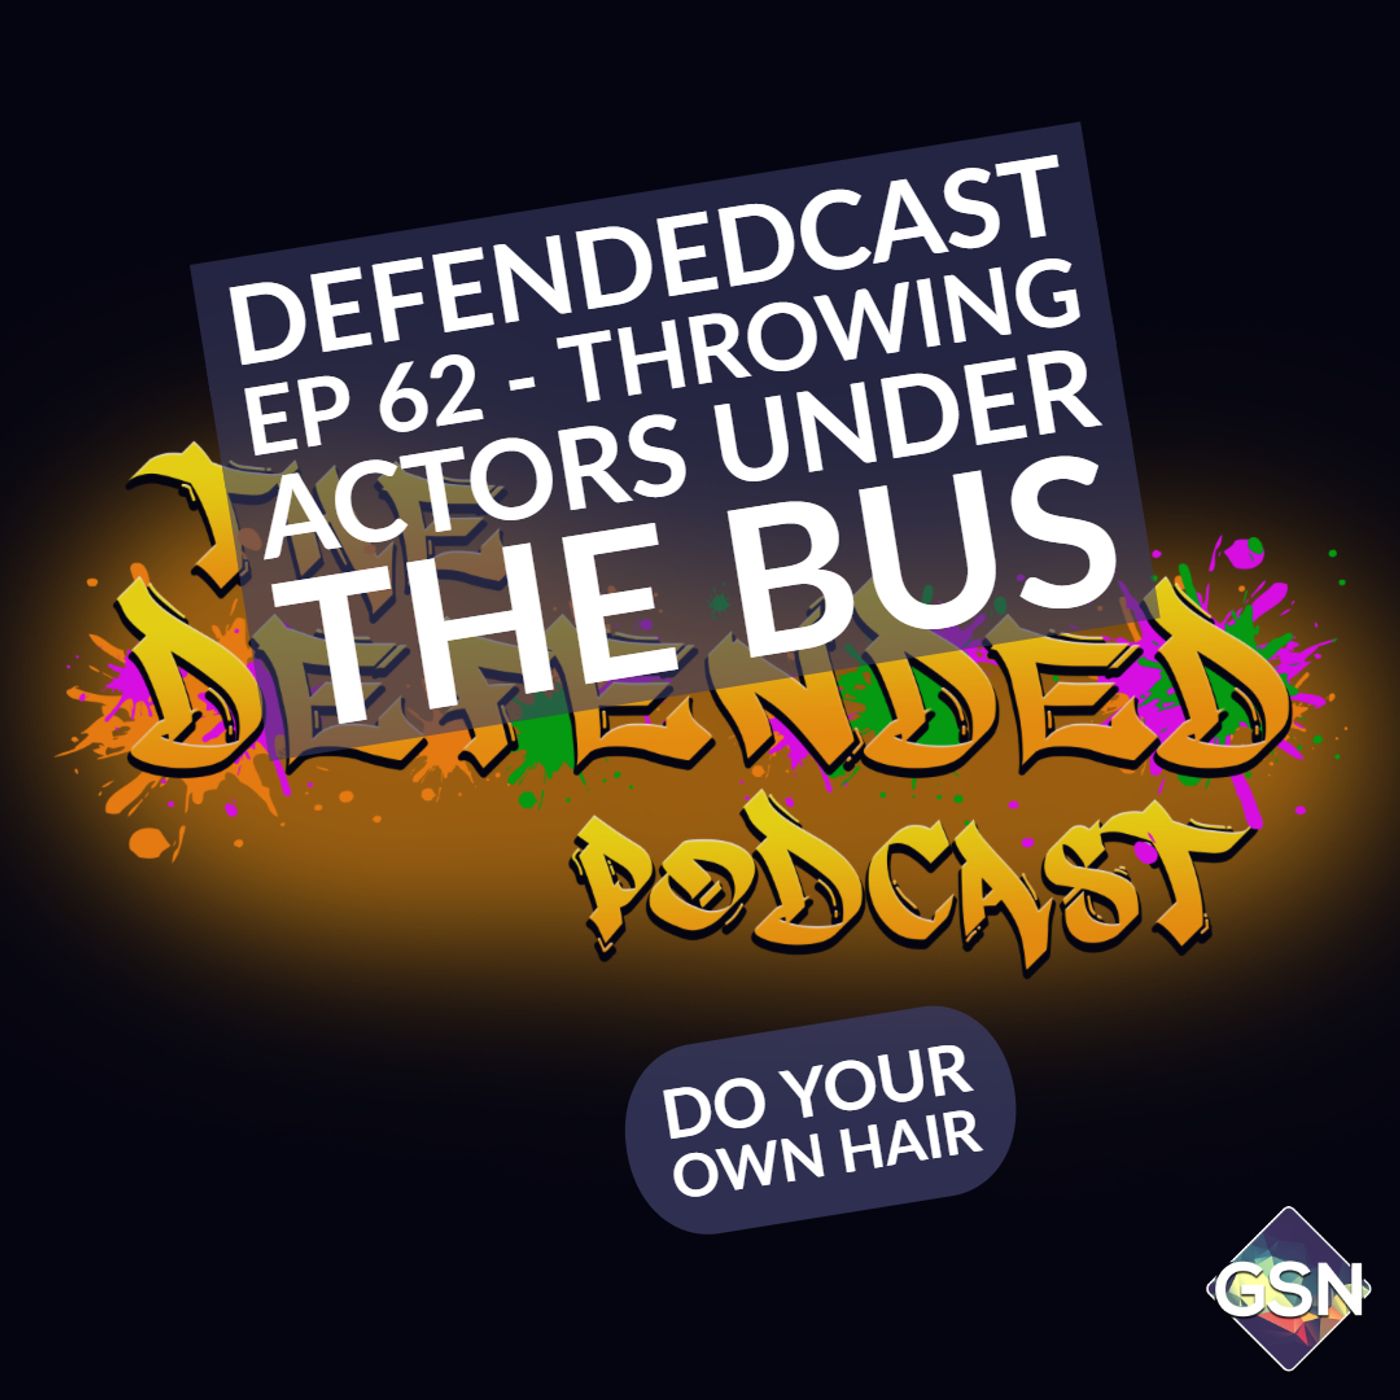 Defendedcast Ep 62 -  Throwing actors under the bus